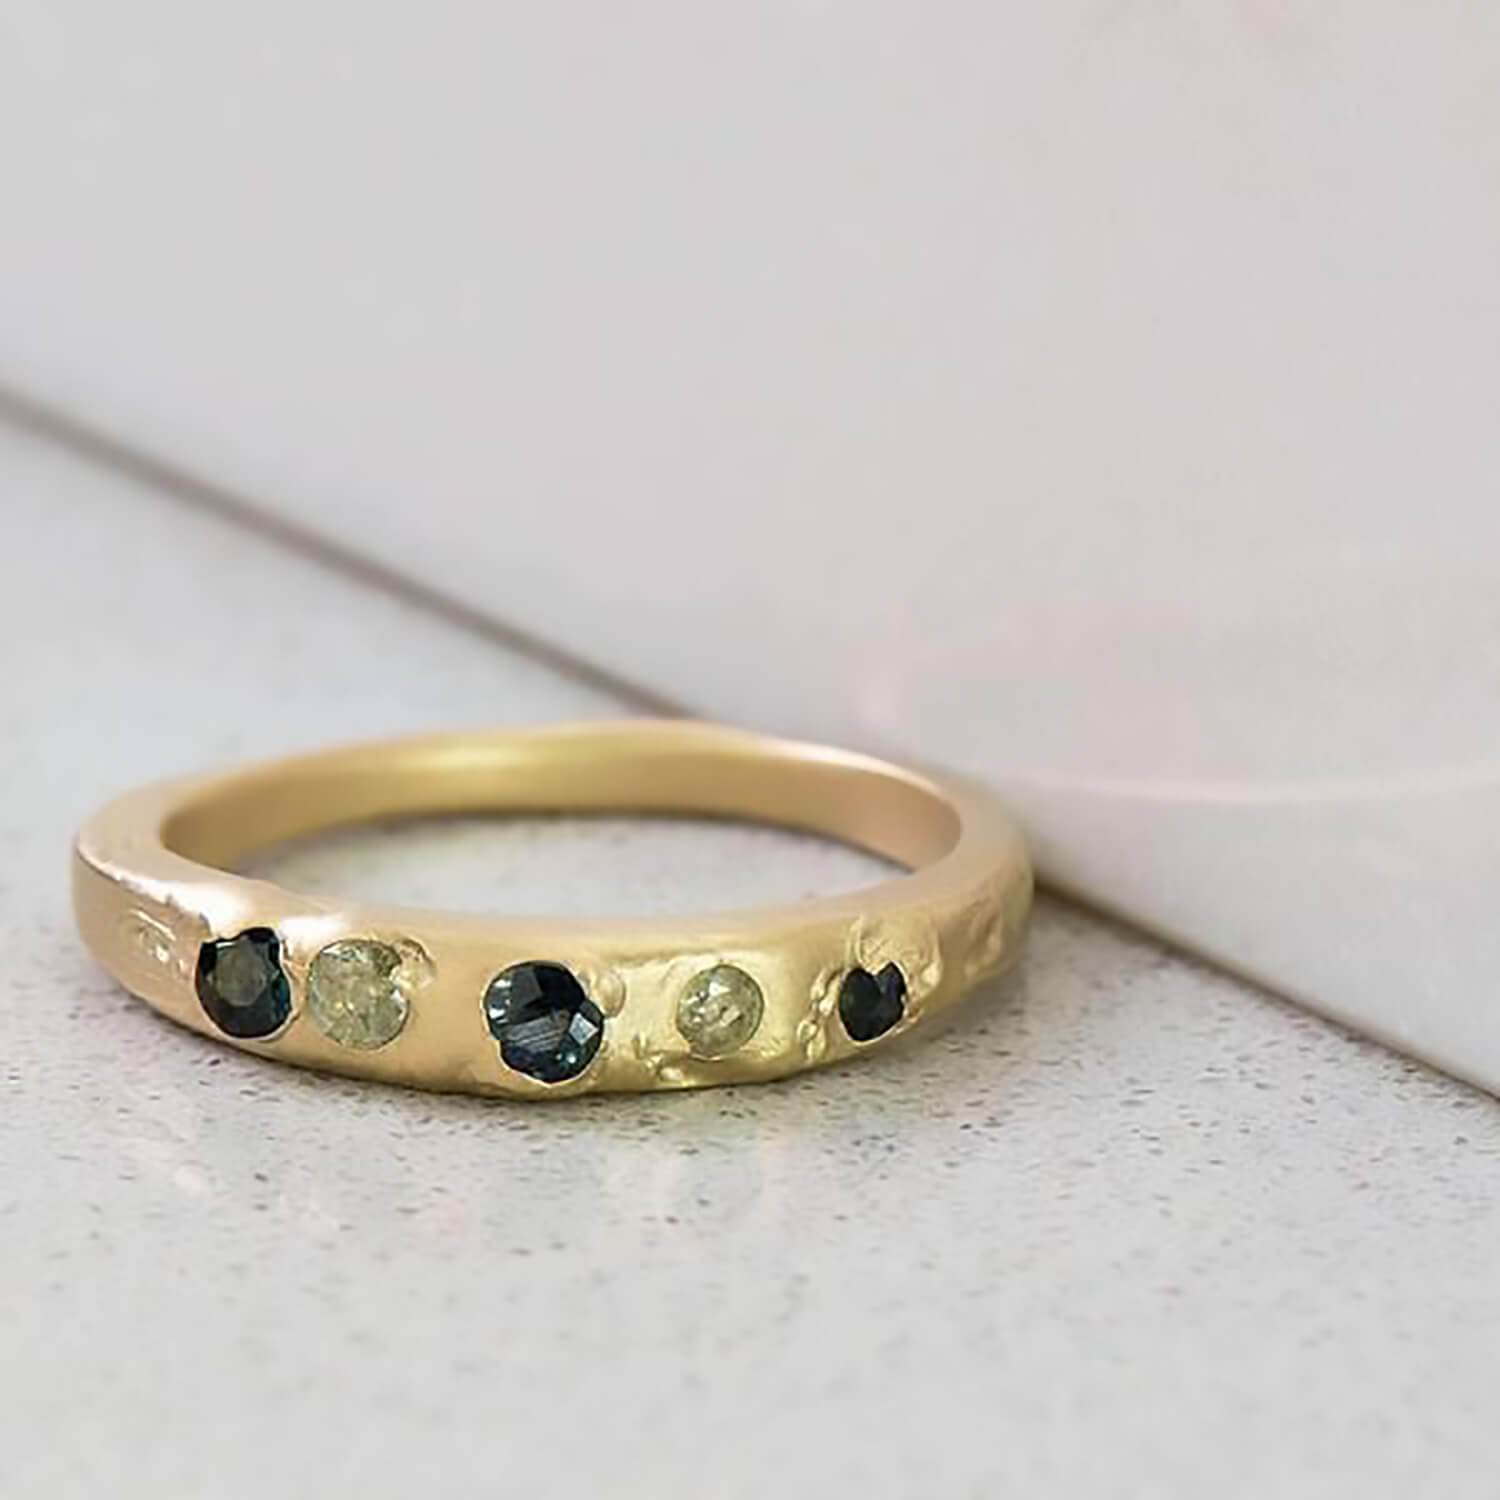 Recycled 14 karat yellow gold set in cast Kimberlite ring with five natural recycled sapphires brought to a satin finish.